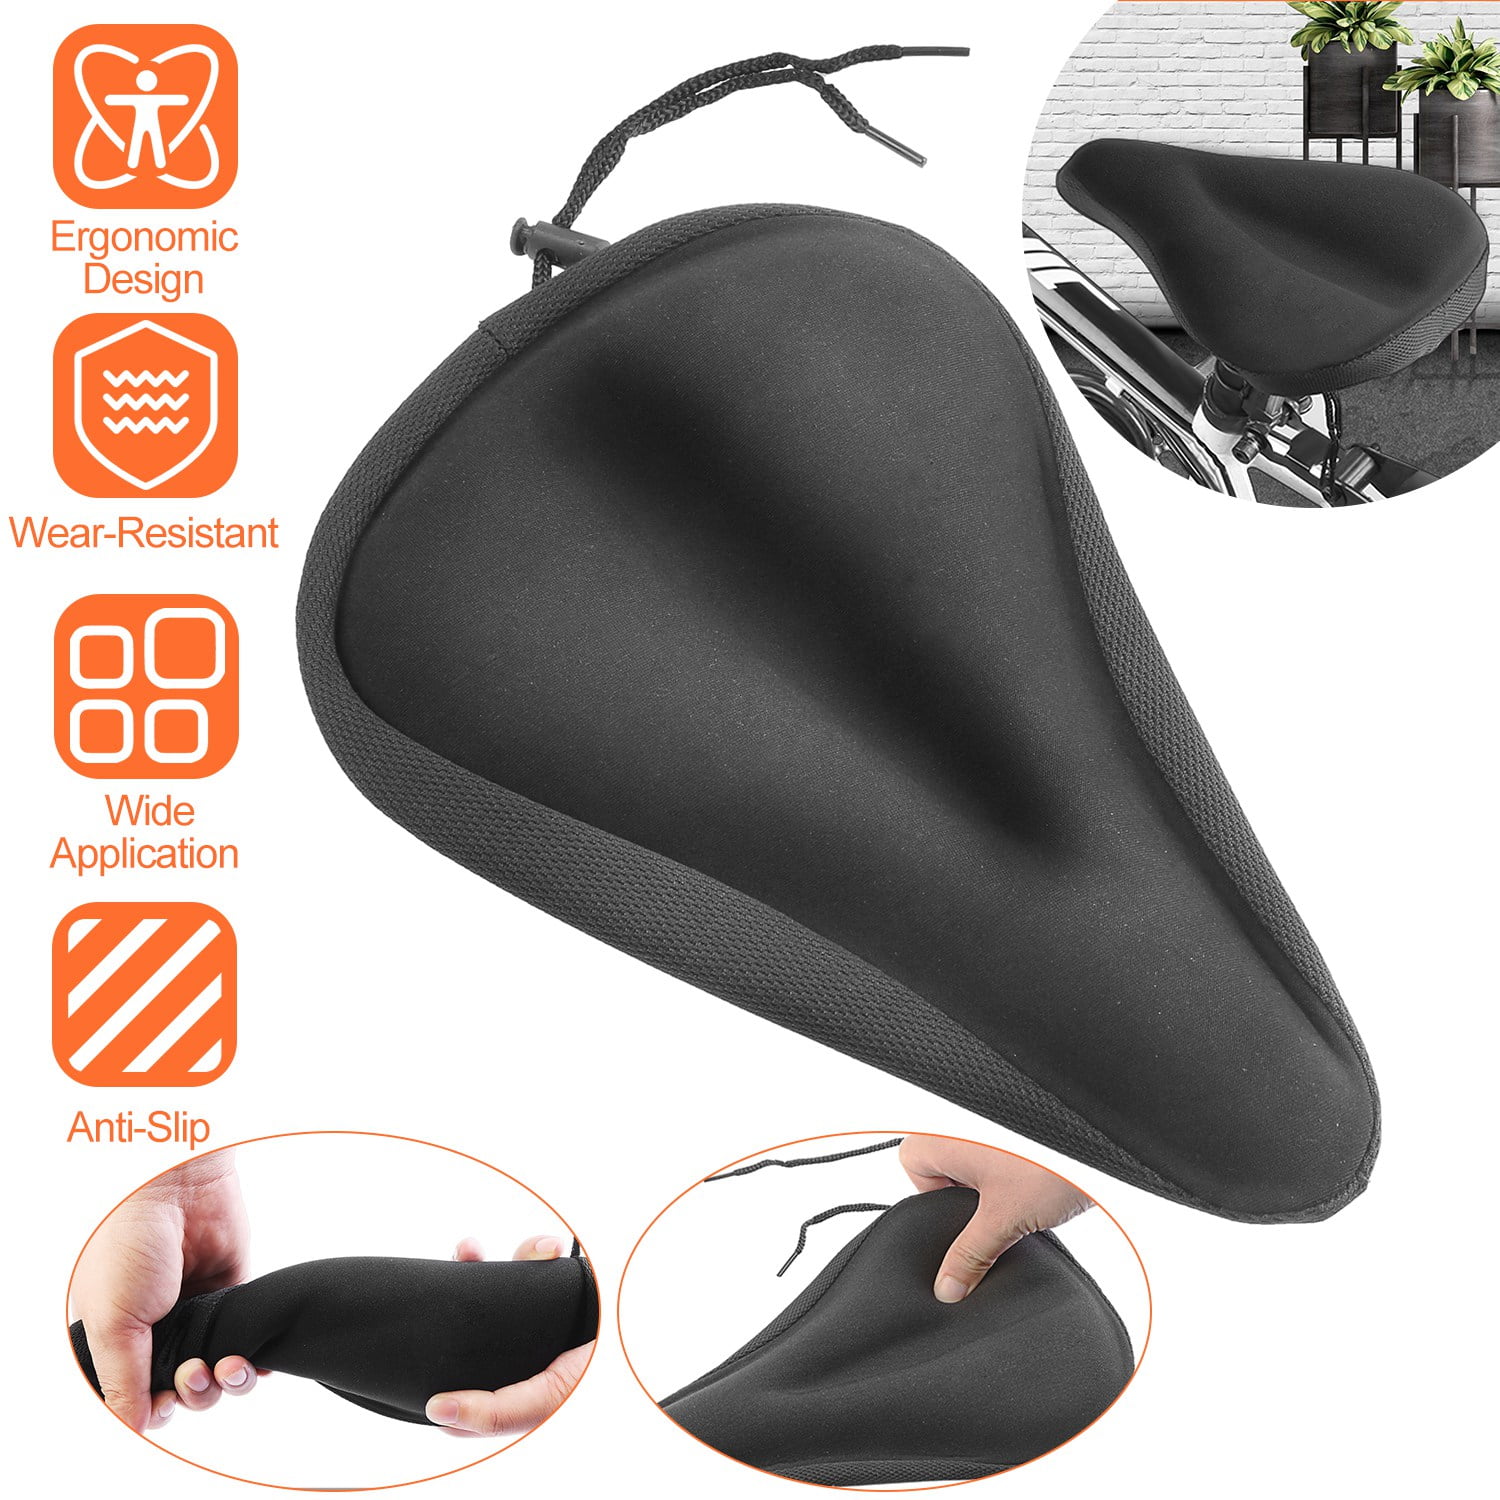 Extra Soft Narrow Bike Seat Cushion with Water&Dust Resistant Cover Reflective Band Bandanas for Cycling Timebox Bike Seat Cover Cushion Memory Foam Gel Bike Saddle Cushion